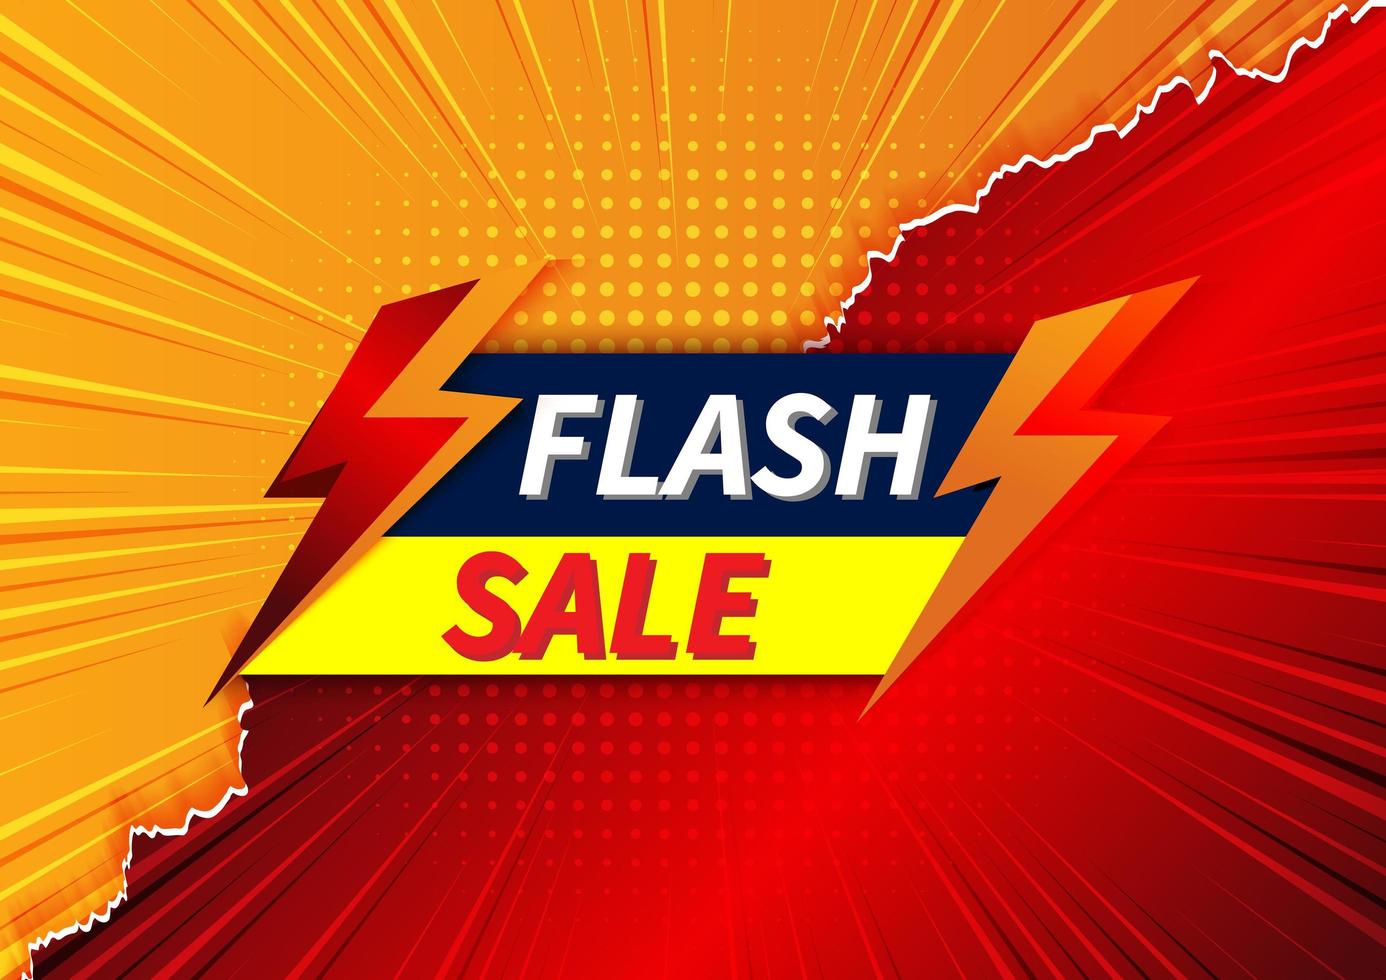 Flash sale banner design template offer shopping on orange and red background. vector